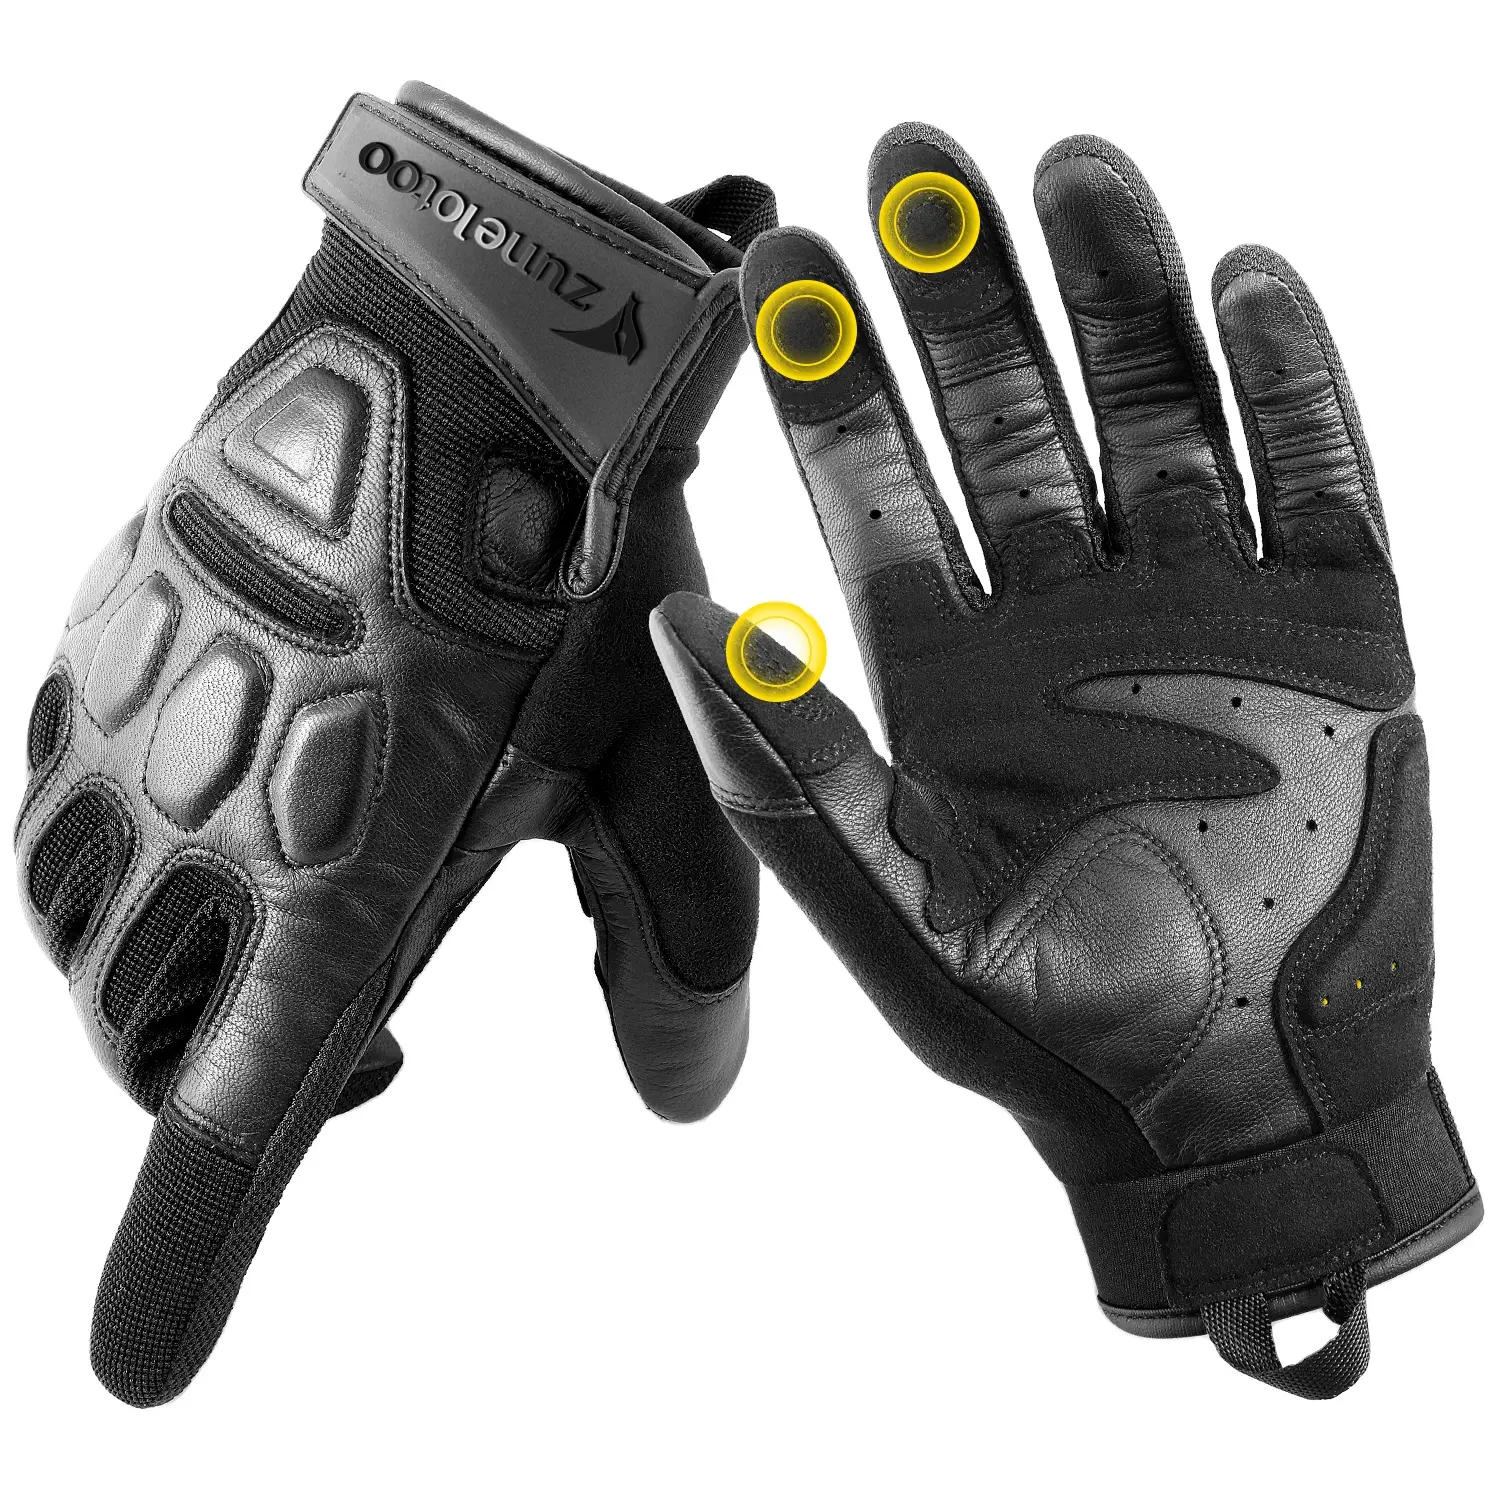 Zune Lotoo Hot Sale High Quality Cycling Gloves Full Finger Outdoor Sports Hiking Climbing Bike Motorcycle Gloves